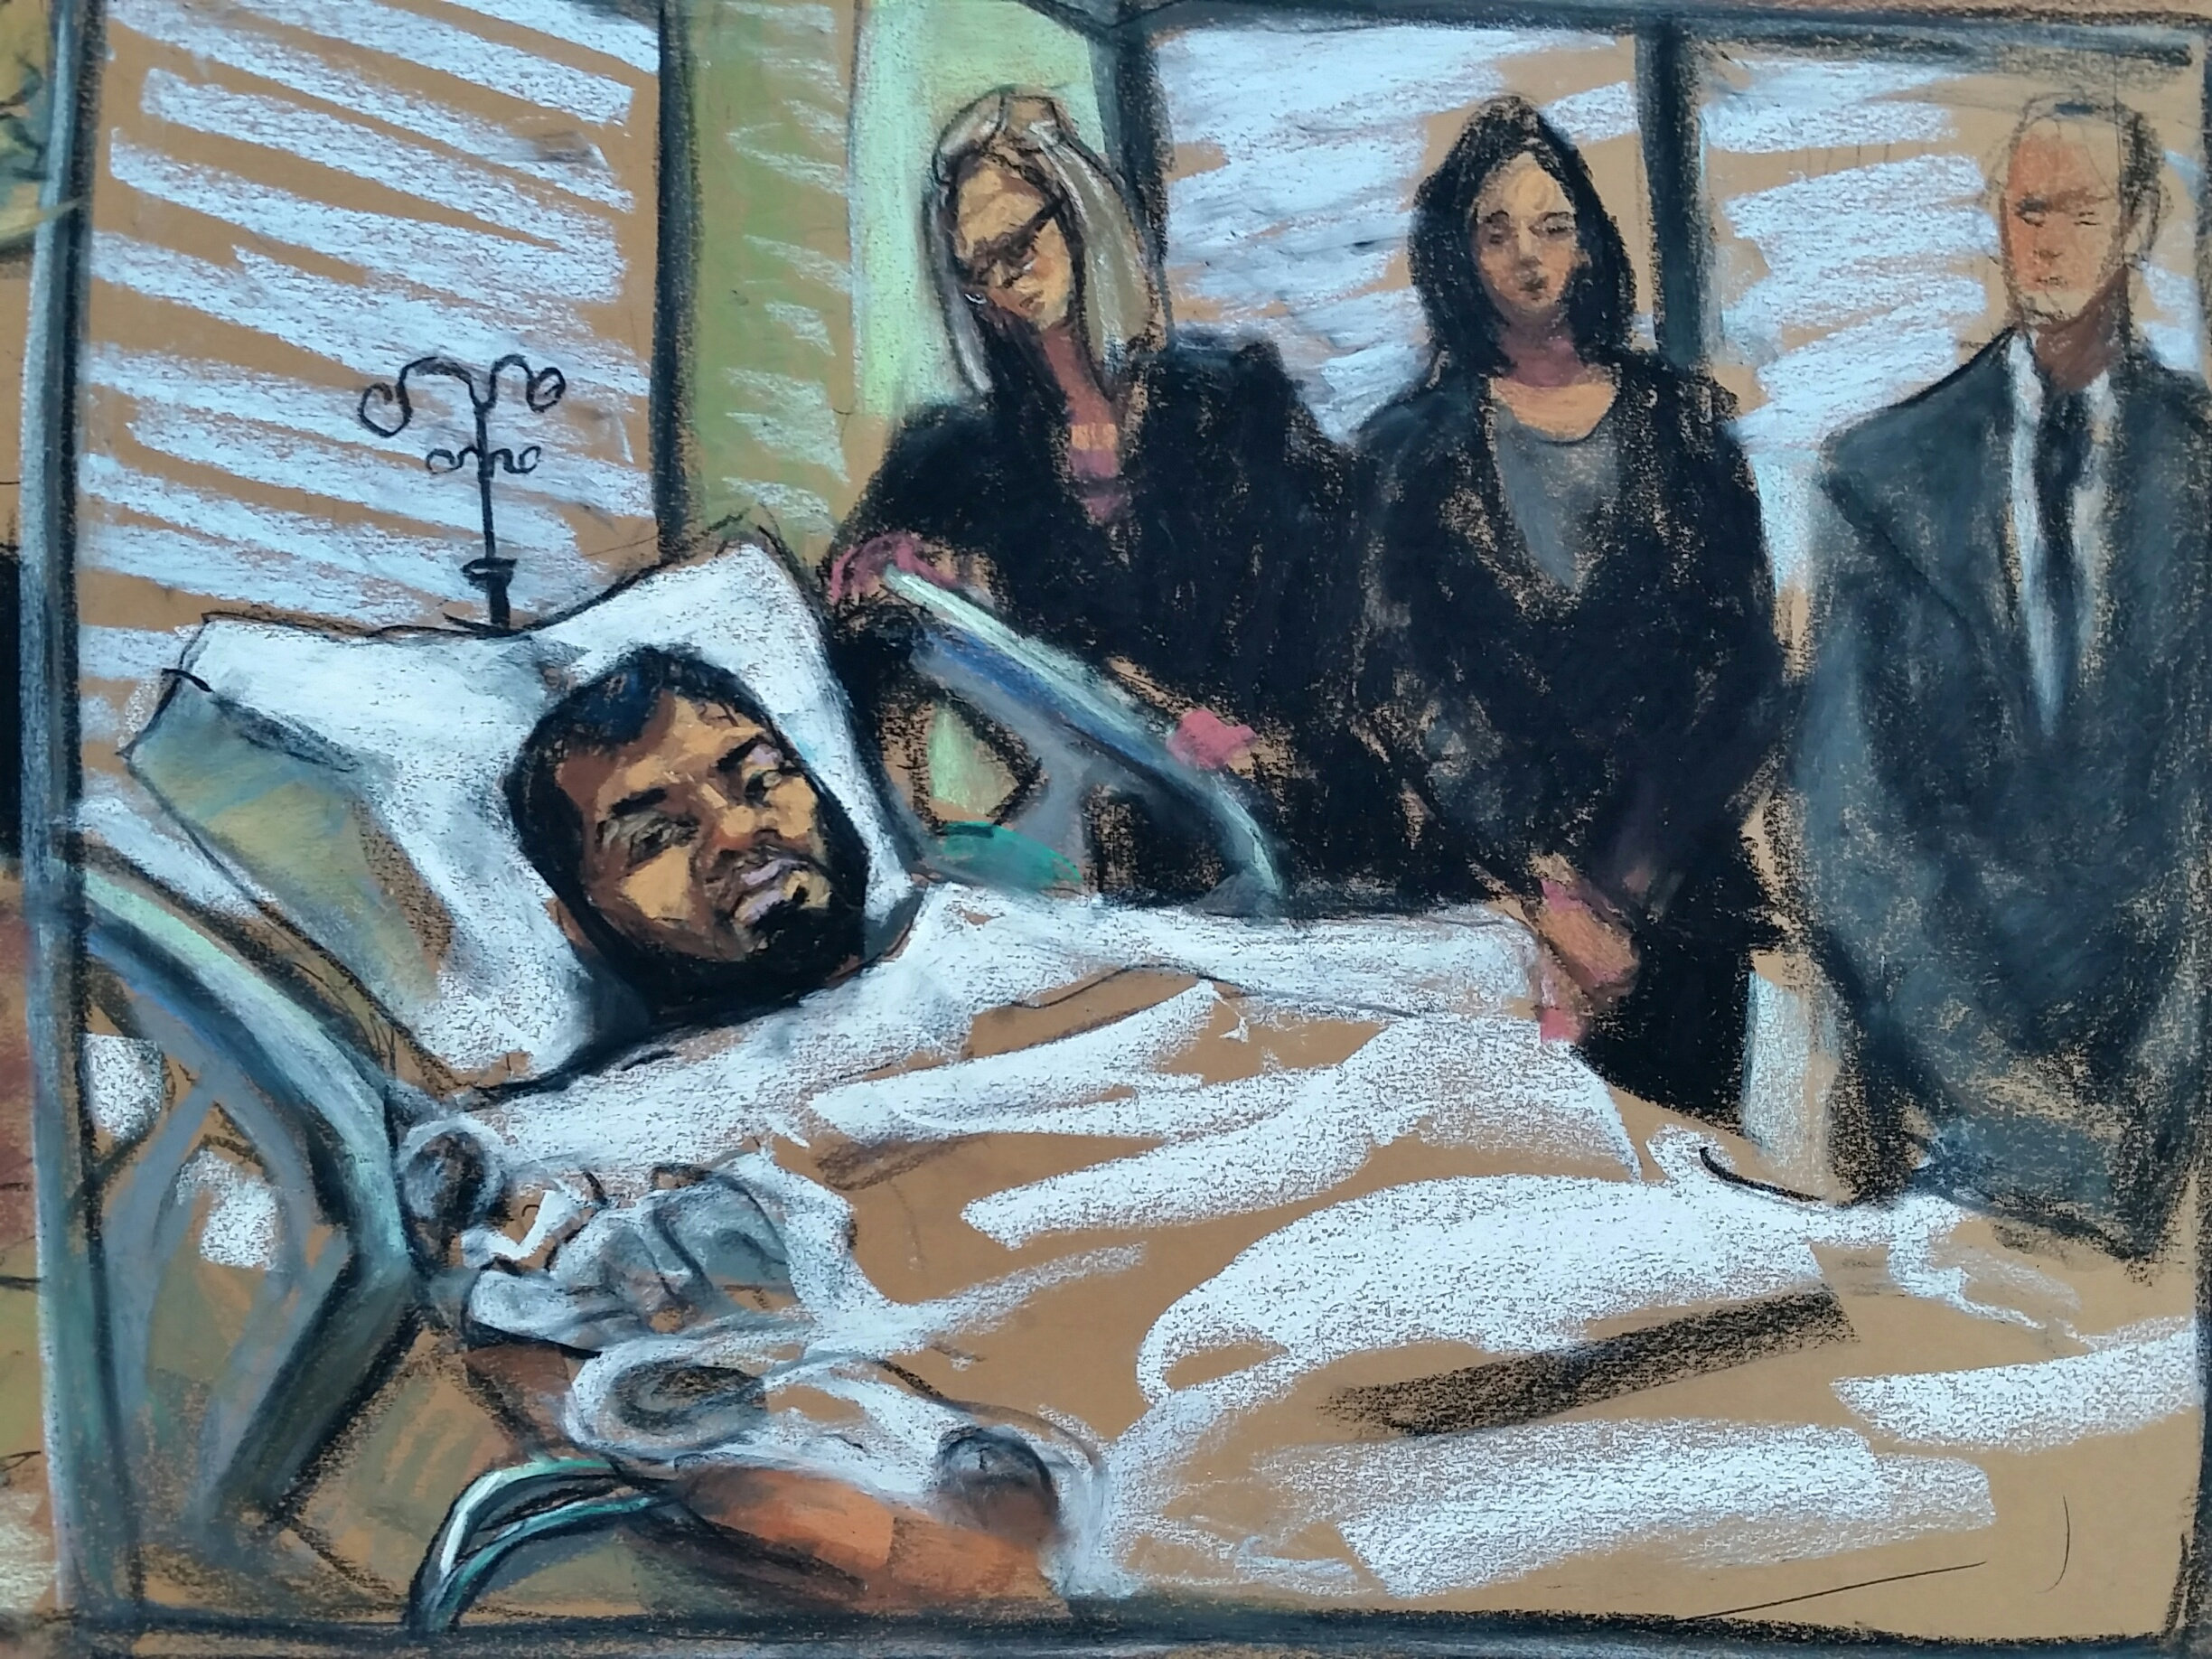 Akayed Ullah is seen in this courtroom sketch appearing by video for a hearing from his bed in Bellevue Hospital in New York, NY, U.S., December 13, 2017. REUTERS/Jane Rosenberg